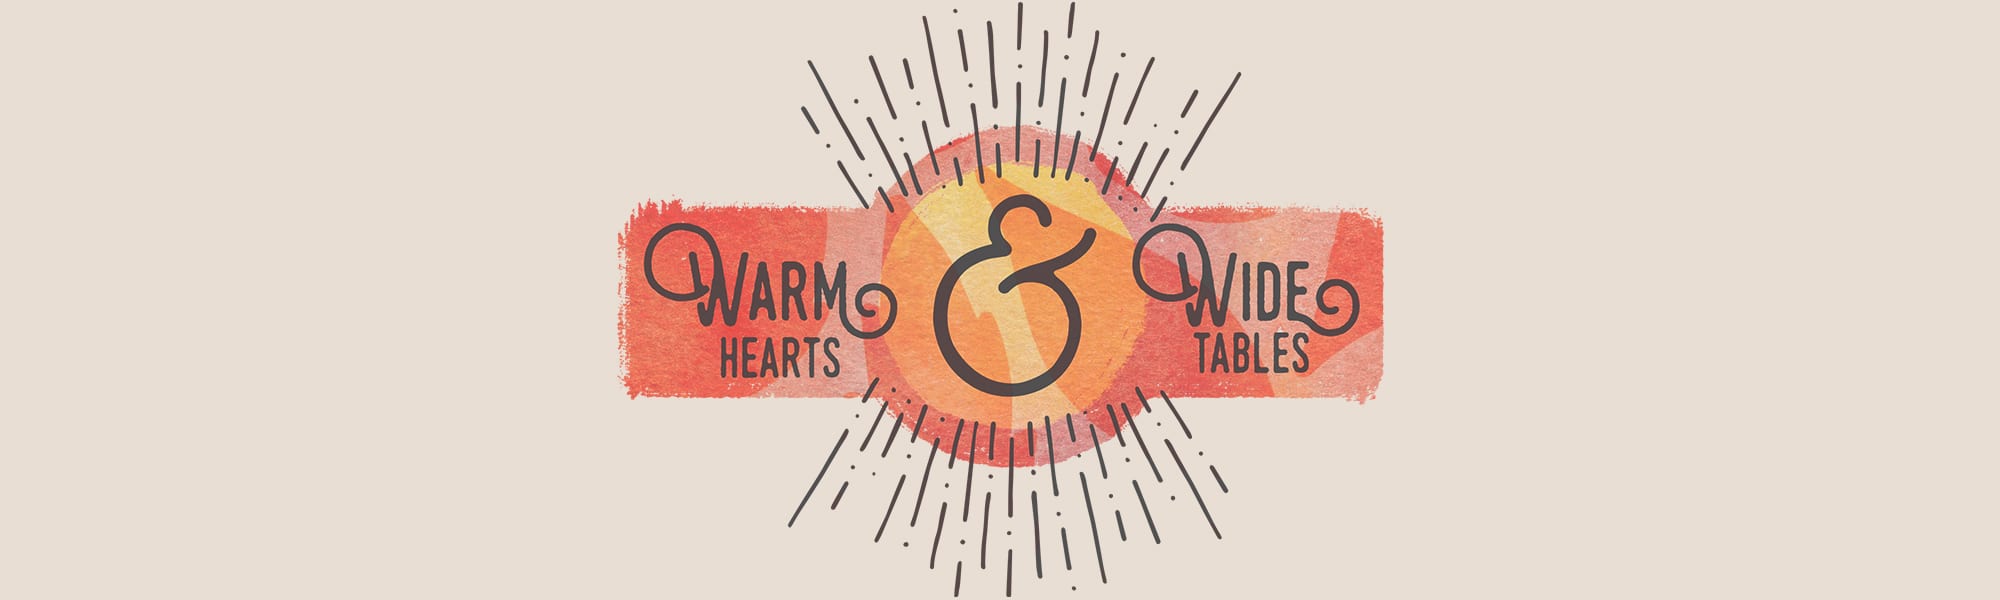 Warm Hearts & Wide Tables